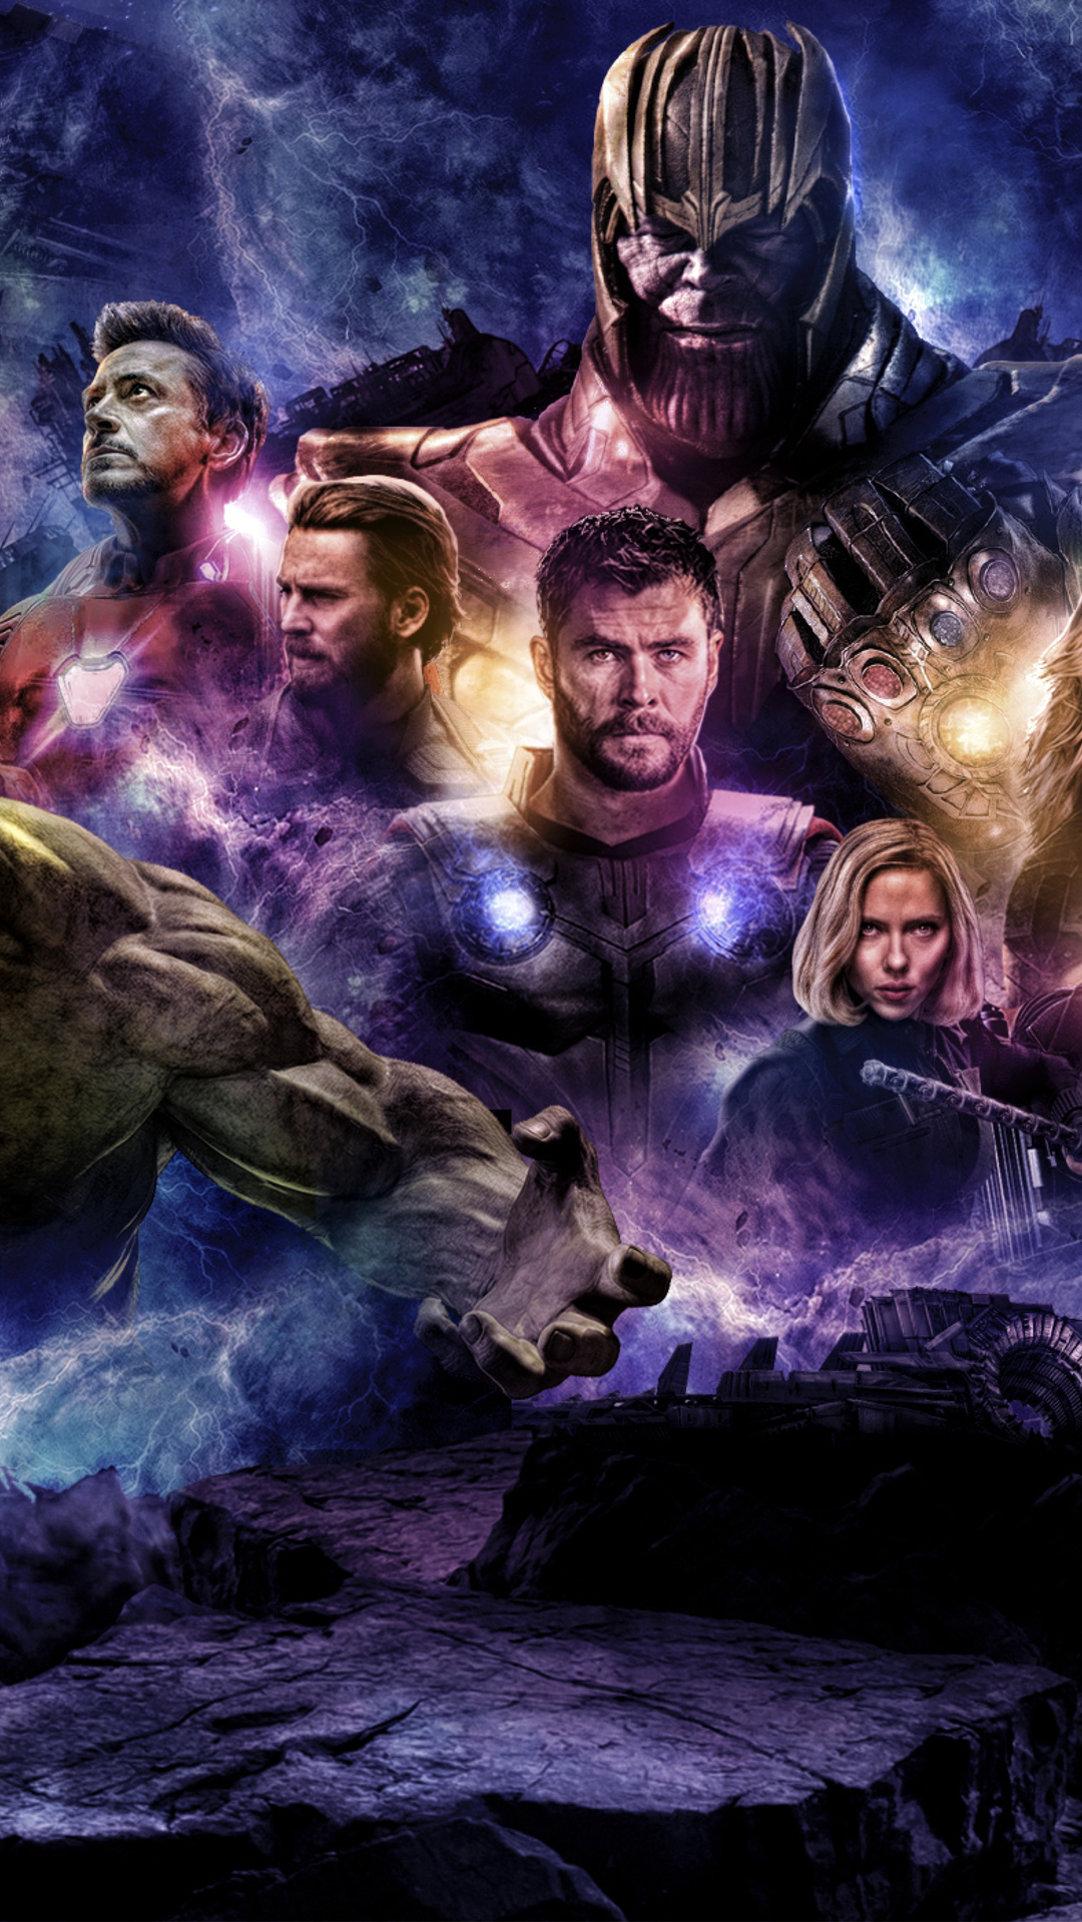 Avengers 4 2019 Movie Poster Wallpaper ID on Movies